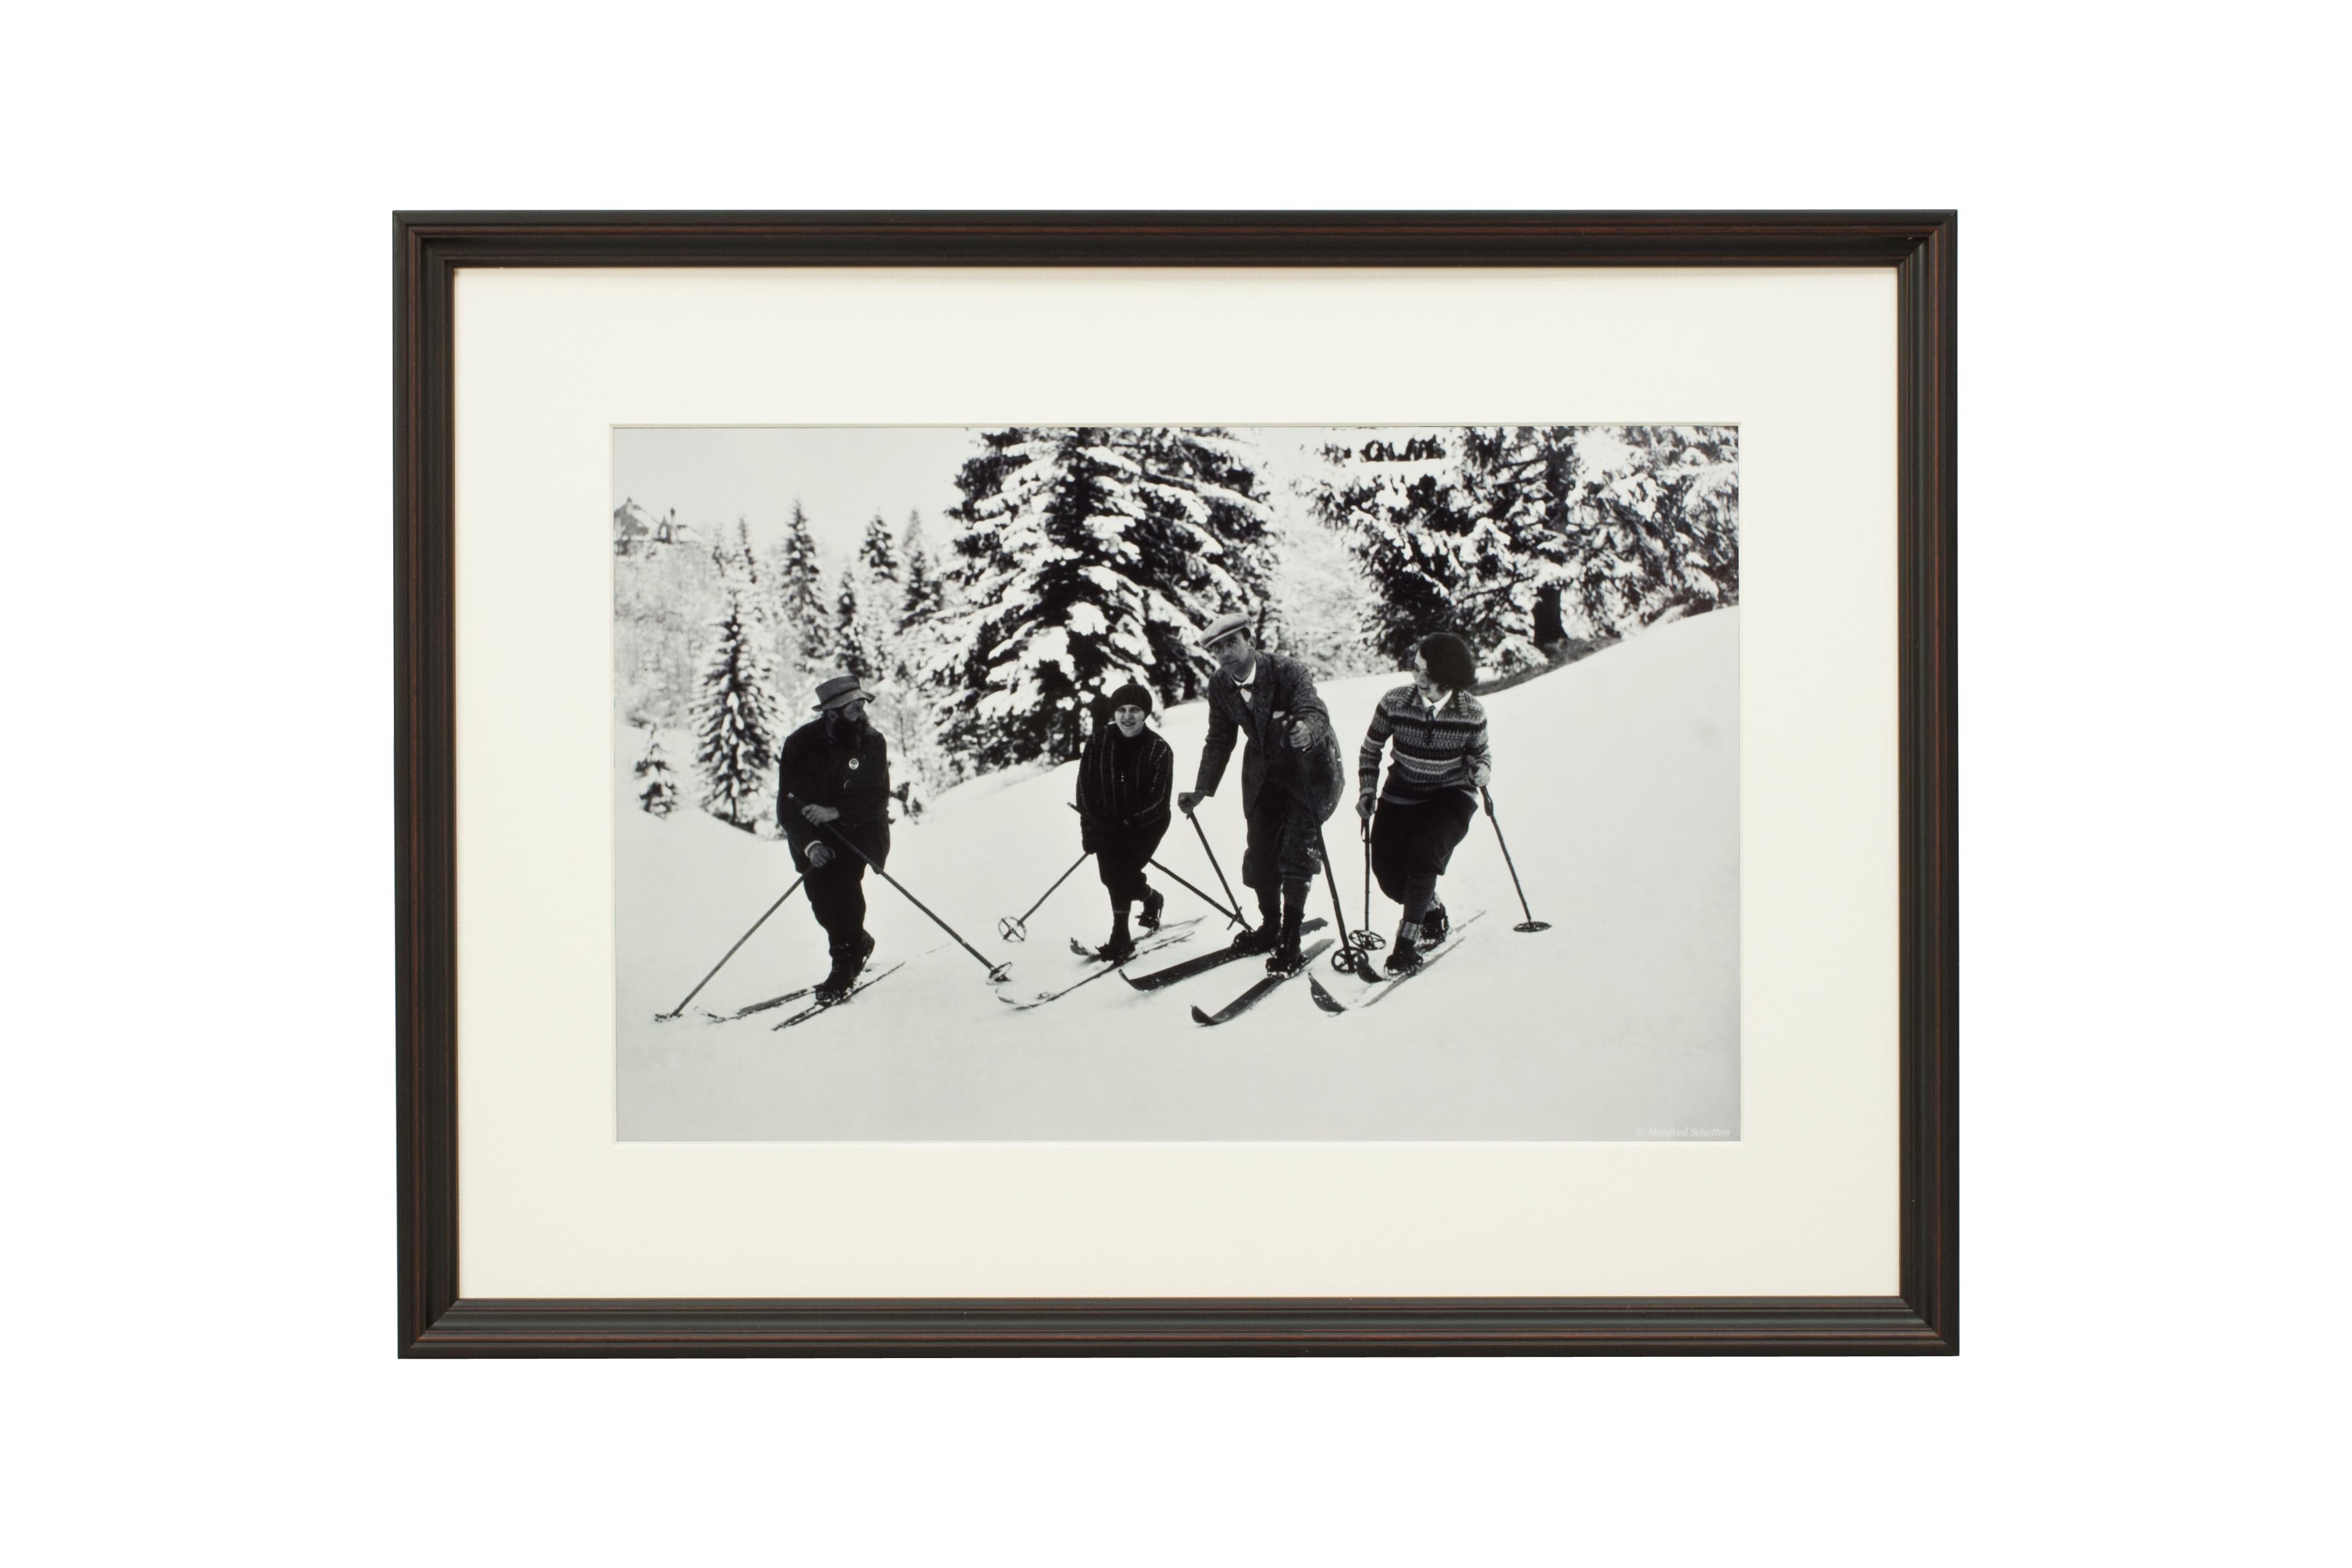 
'BEND ZIE KNEES', a modern framed and mounted black and white photograph after an original 1930's skiing photograph. The frame is black with a burgundy undercoat, the glazing is clarity+ premium synthetic glass. Black & white alpine photos are the